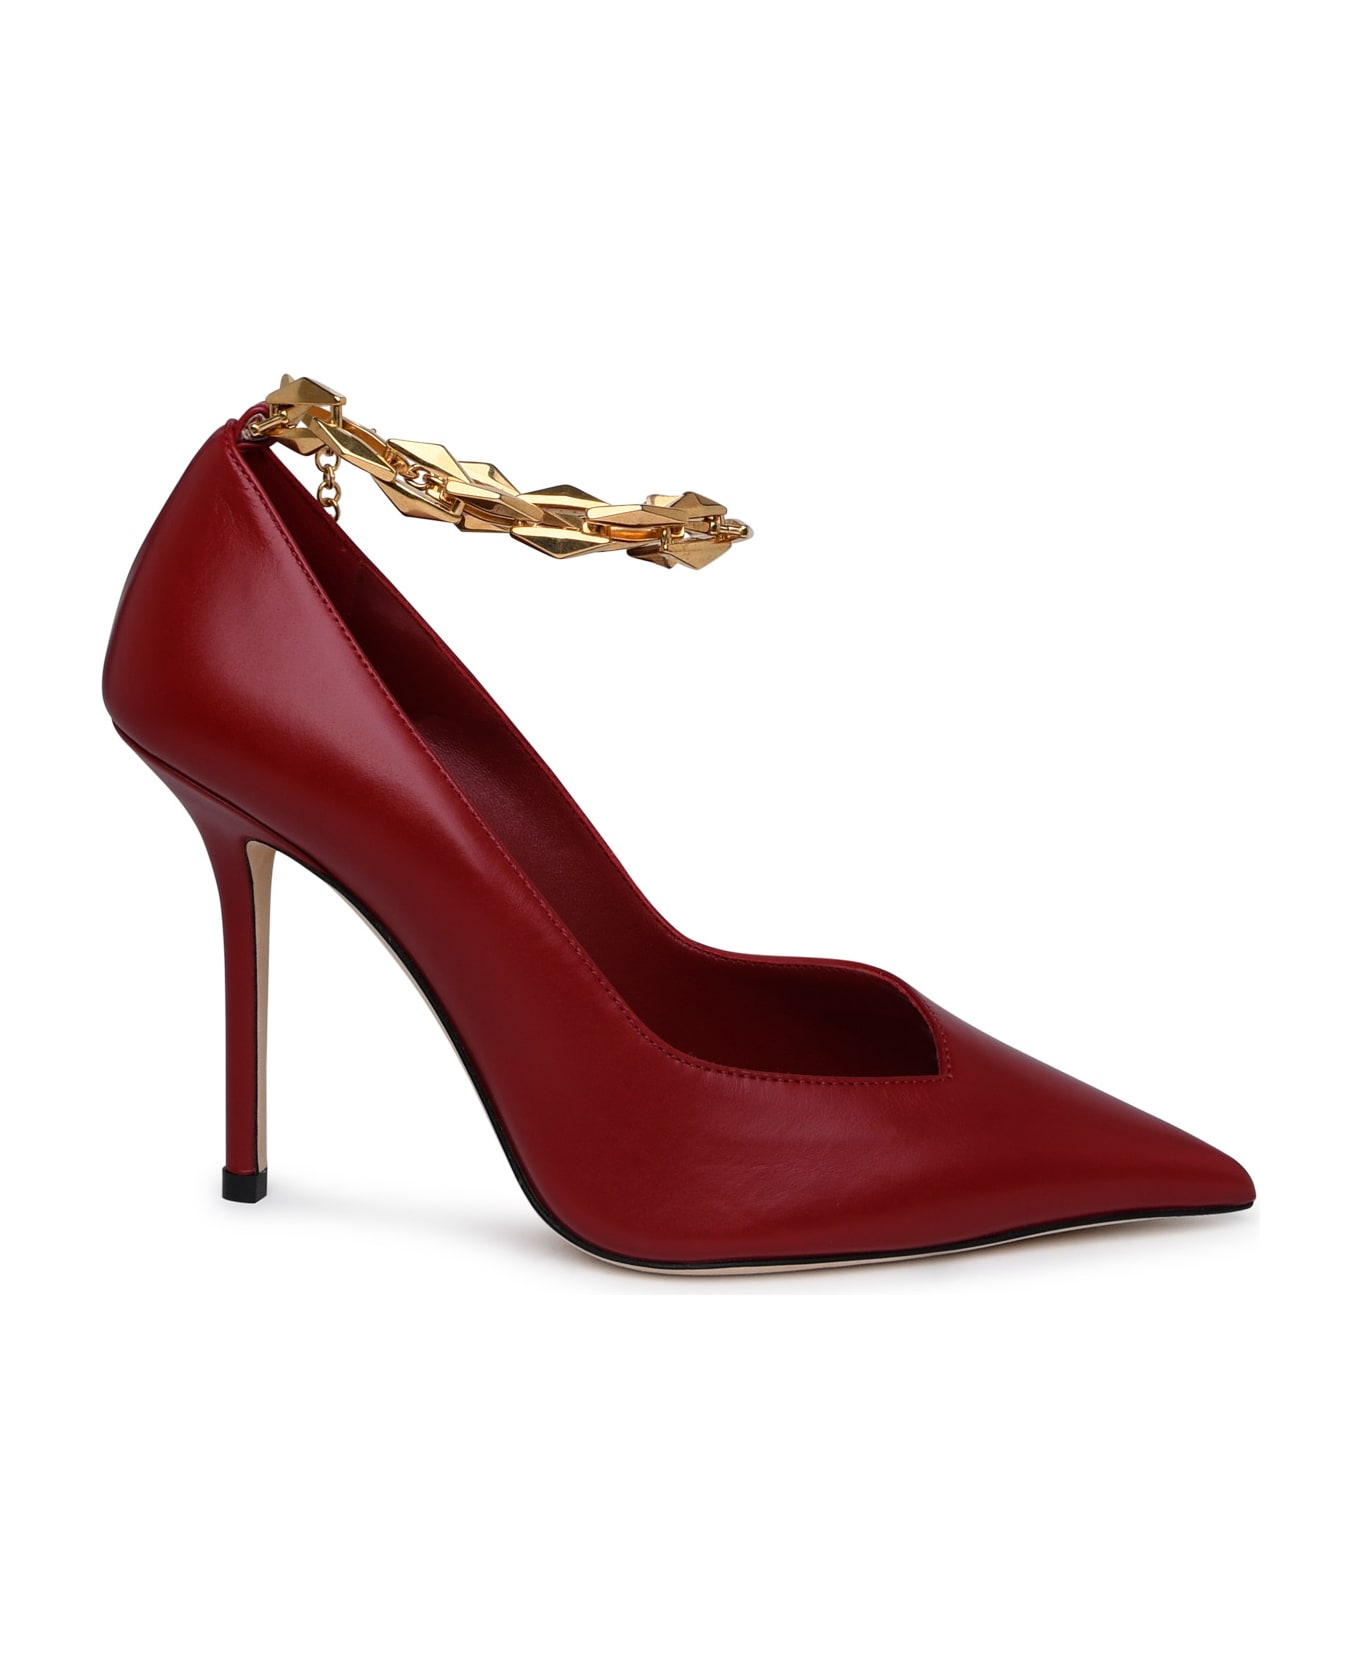 Jimmy Choo Diamond Pumps In Red Leather - Red ハイヒール